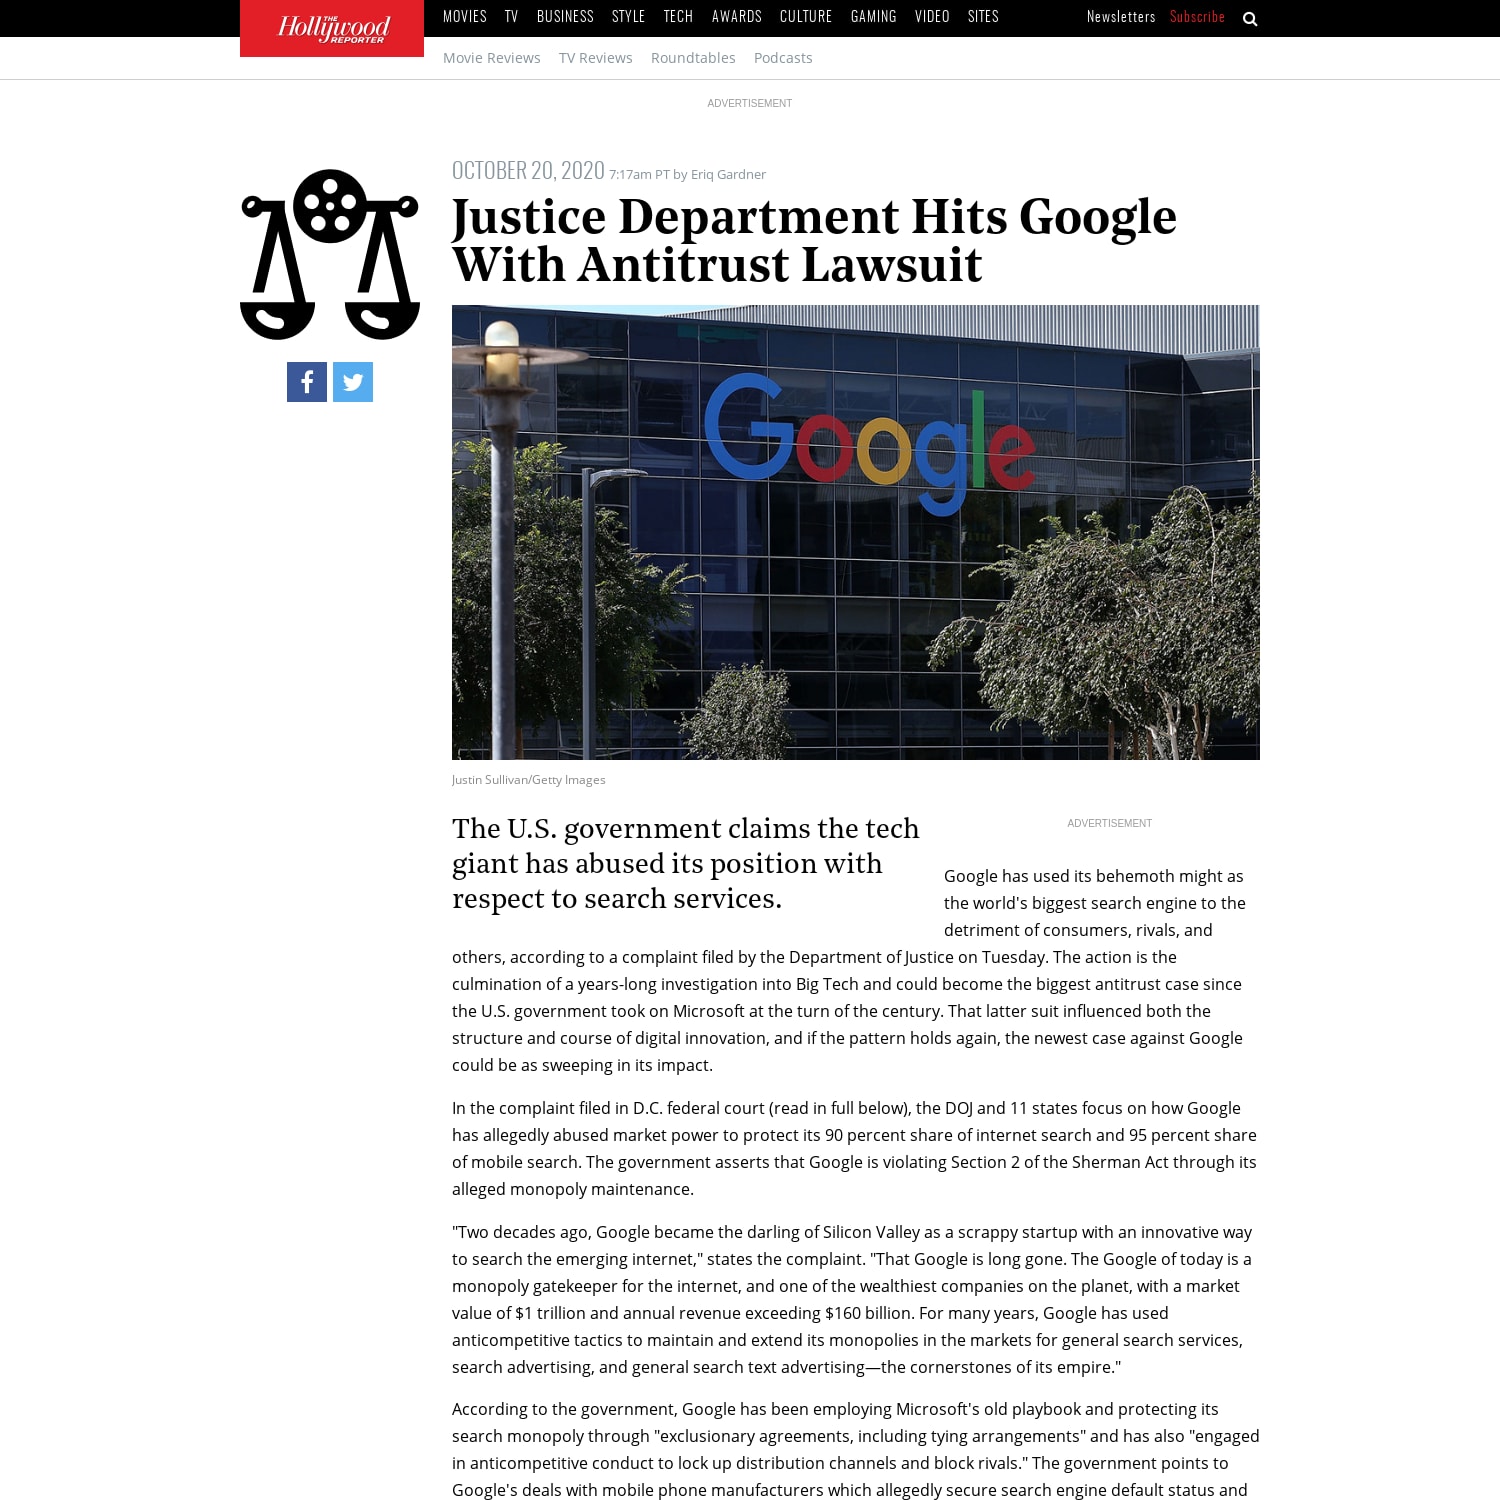 Justice Department Hits Google With Antitrust Lawsuit | Hollywood Reporter